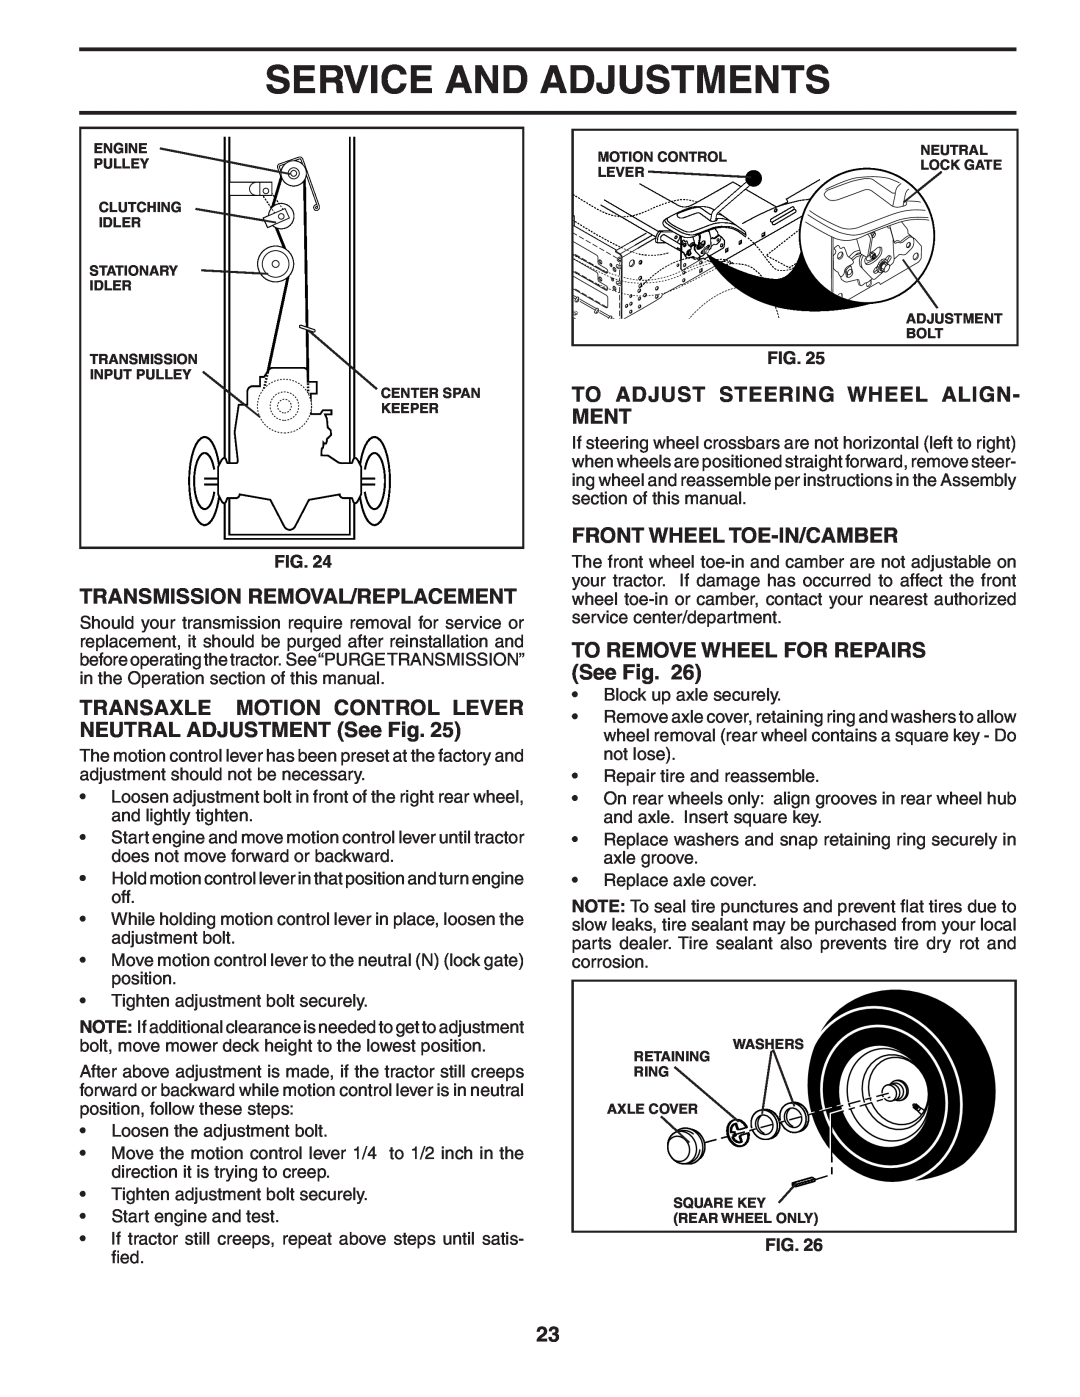 Poulan 188781 owner manual Transmission Removal/Replacement, TRANSAXLE MOTION CONTROL LEVER NEUTRAL ADJUSTMENT See Fig 